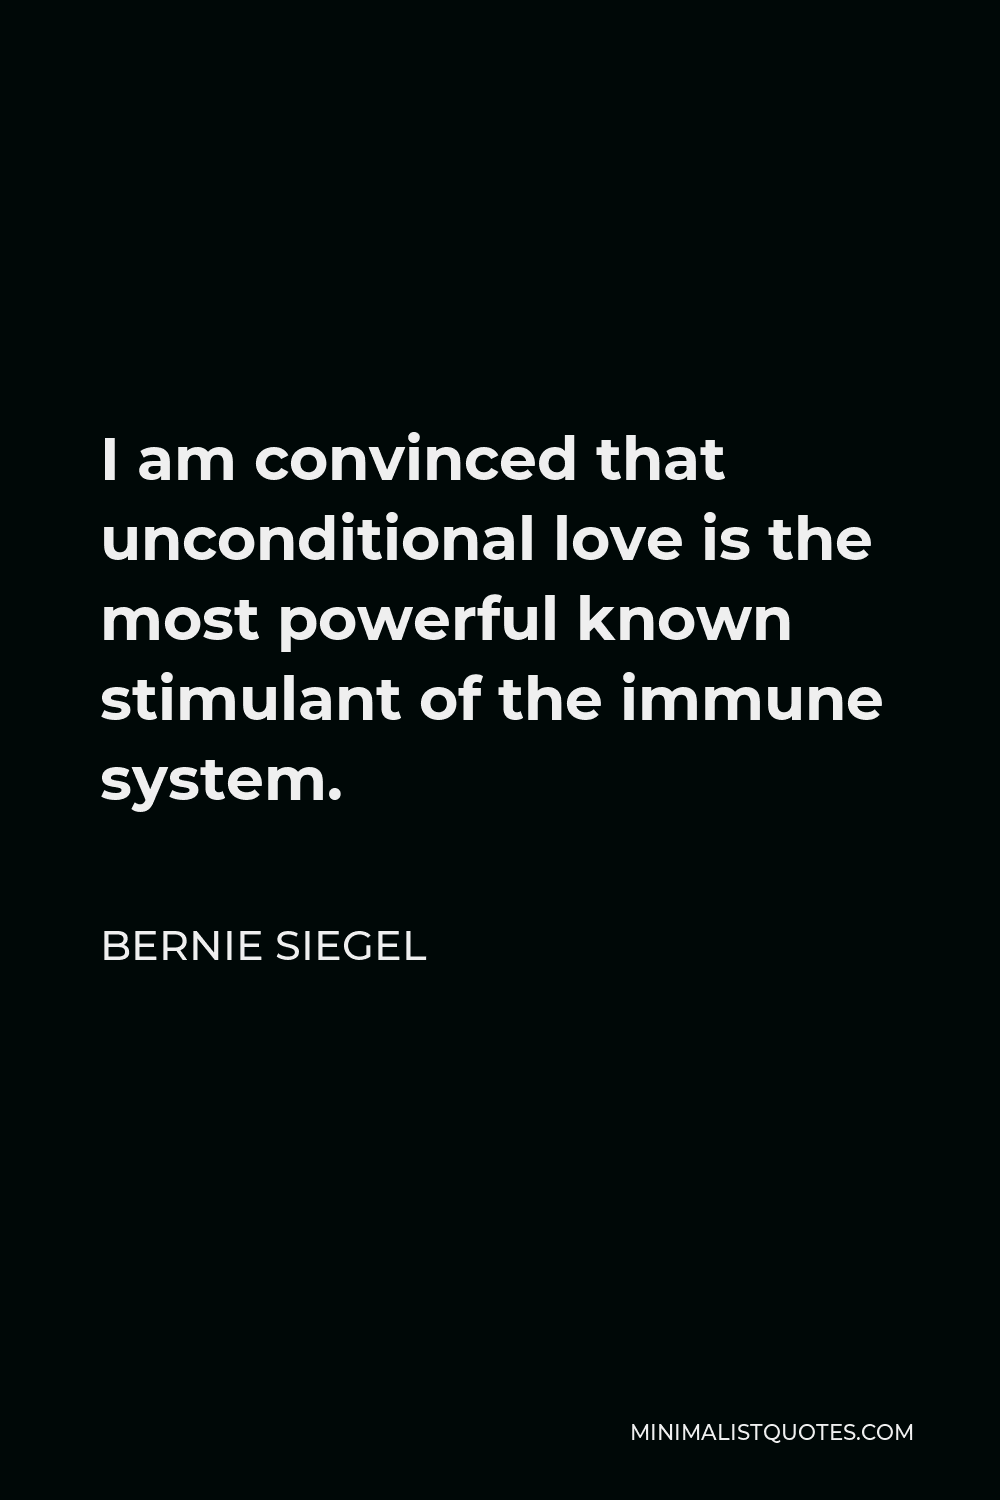 Bernie Siegel Quote - I am convinced that unconditional love is the most powerful known stimulant of the immune system.